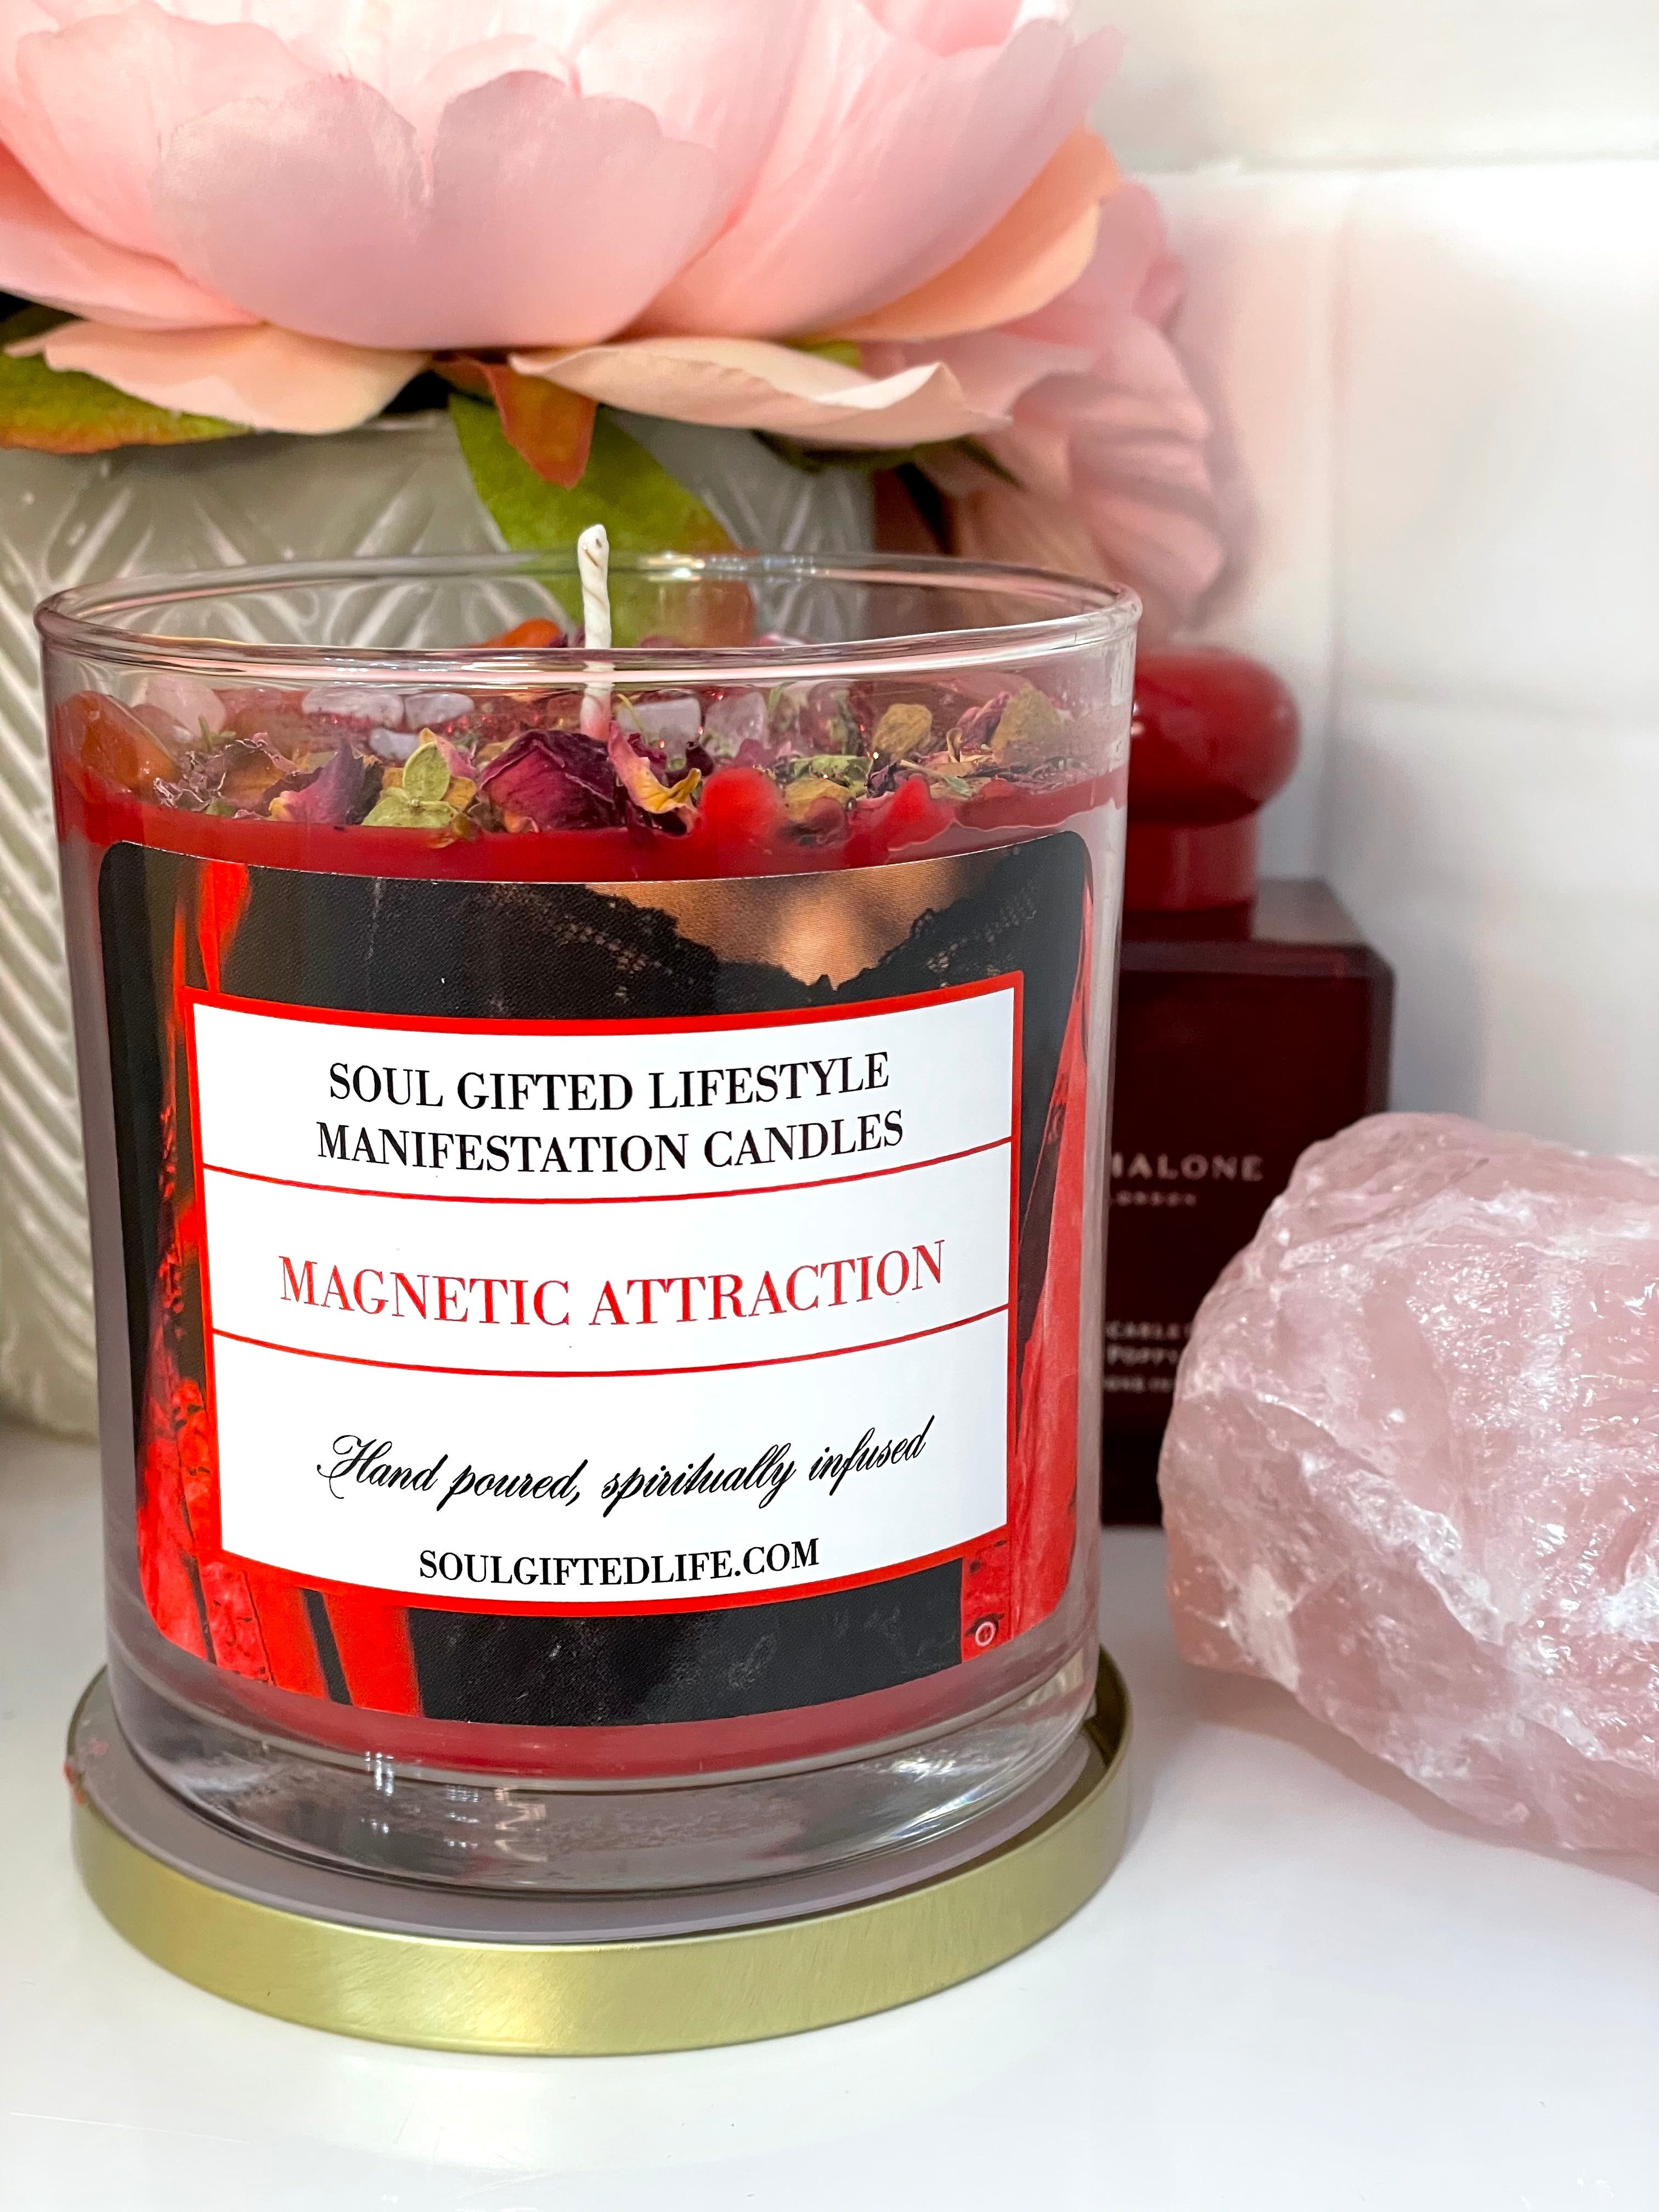 Magnetic Attraction Manifestation Candle